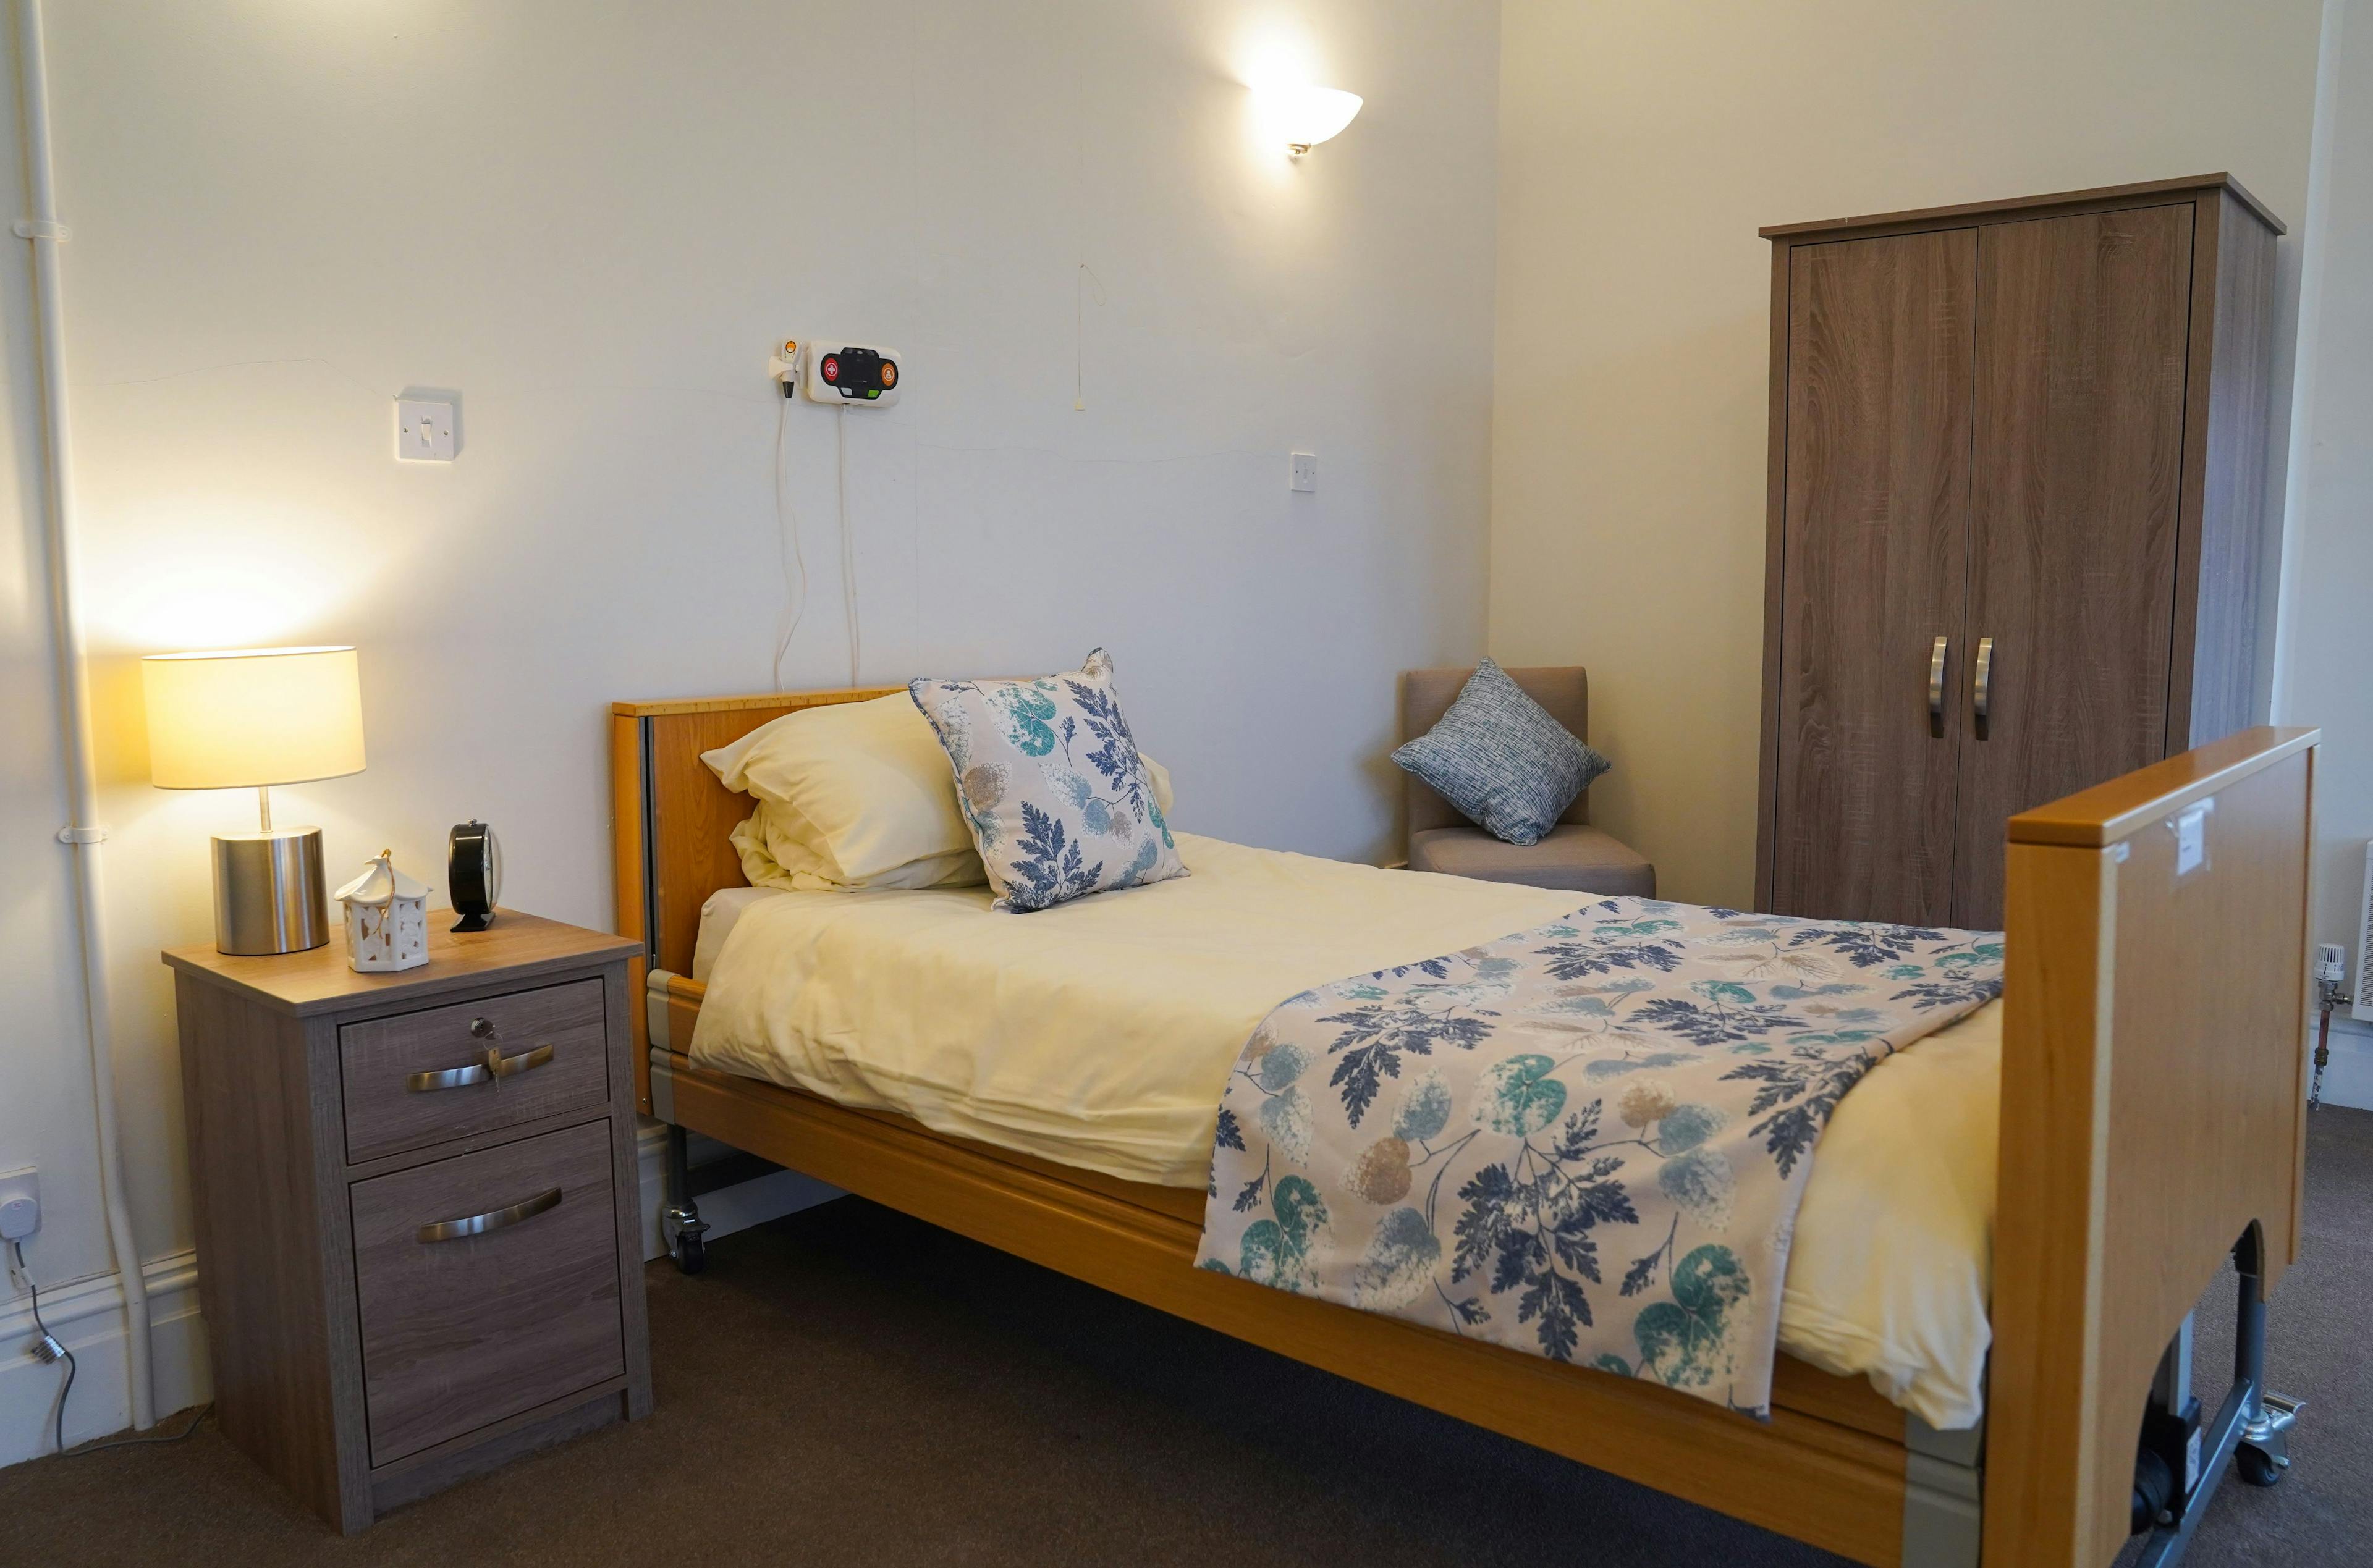 Bedroom at Beach Lawns Care Home in Somerset, South West England